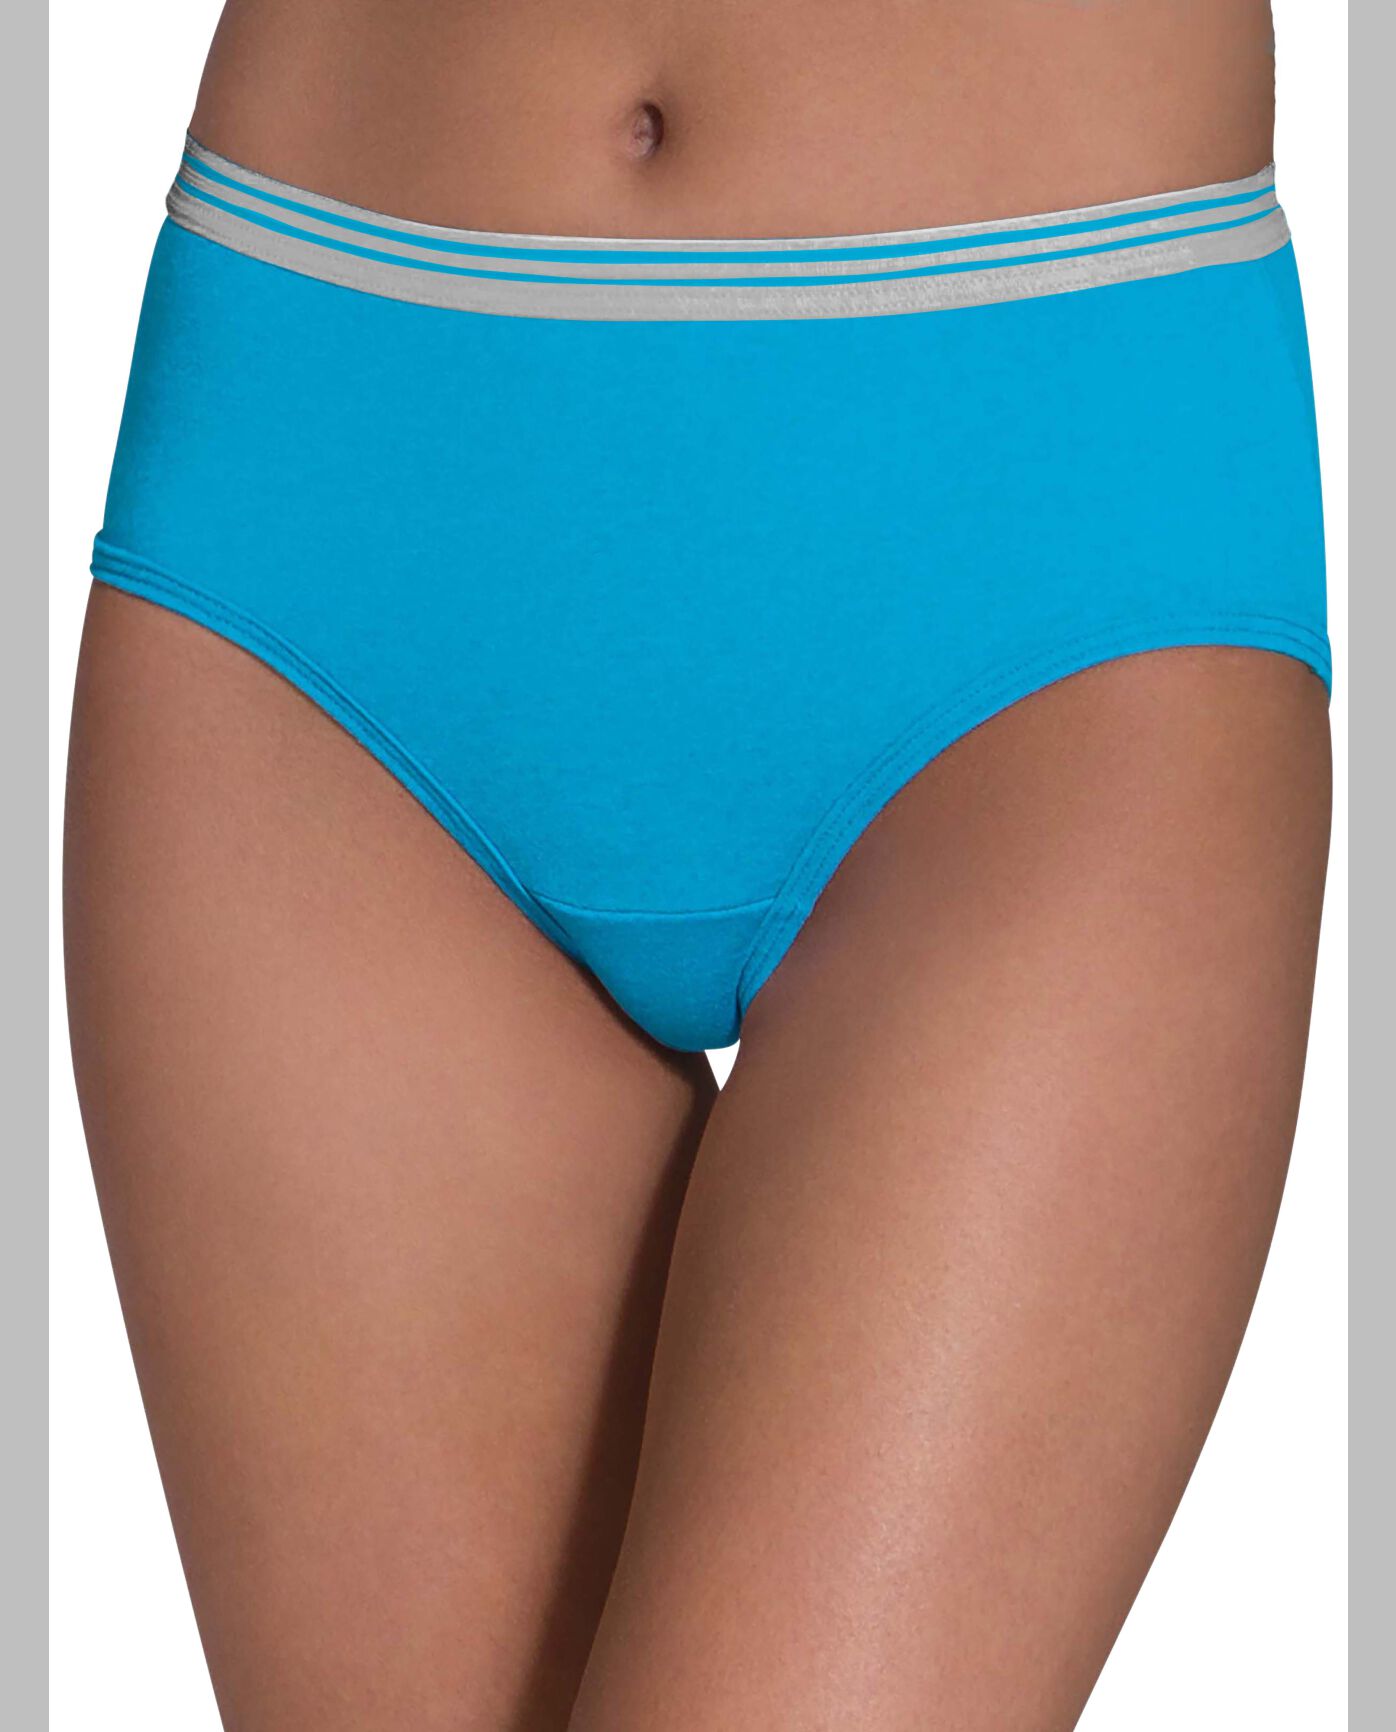 Fruit of the Loom Women's 6pk Breathable Micro-Mesh Hi-Cut Underwear -  Colors May Vary 6 6 ct